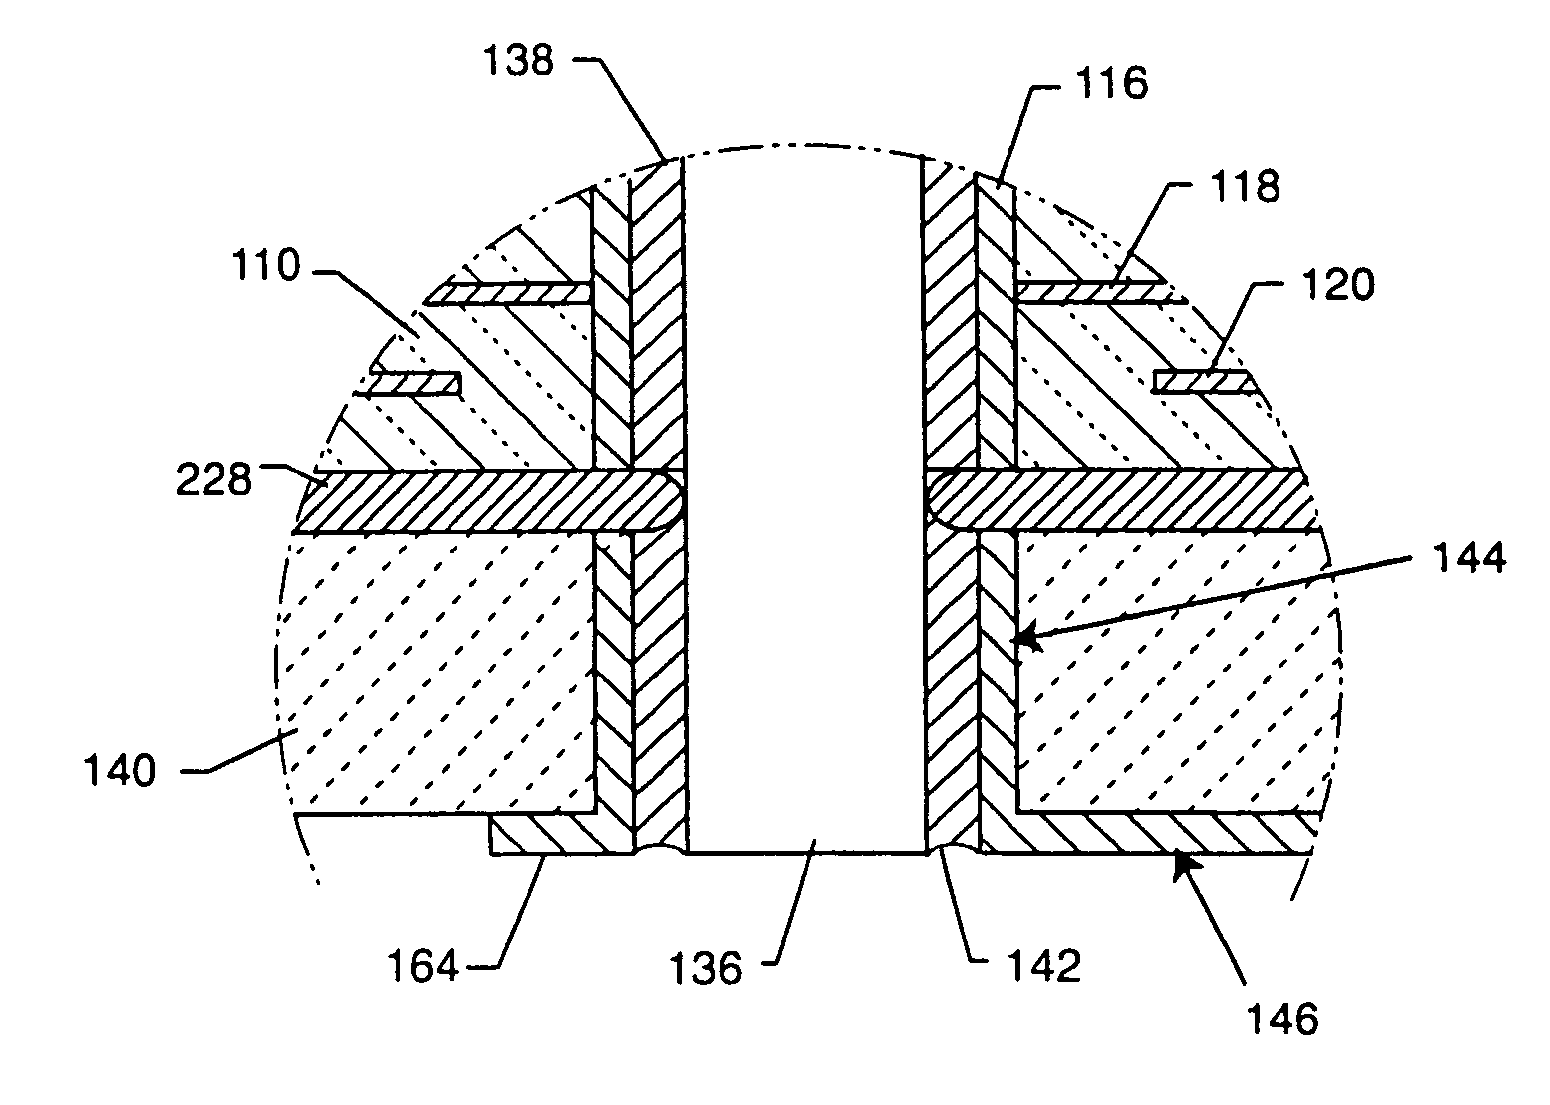 EMI filter terminal assembly with wire bond pads for human implant applications